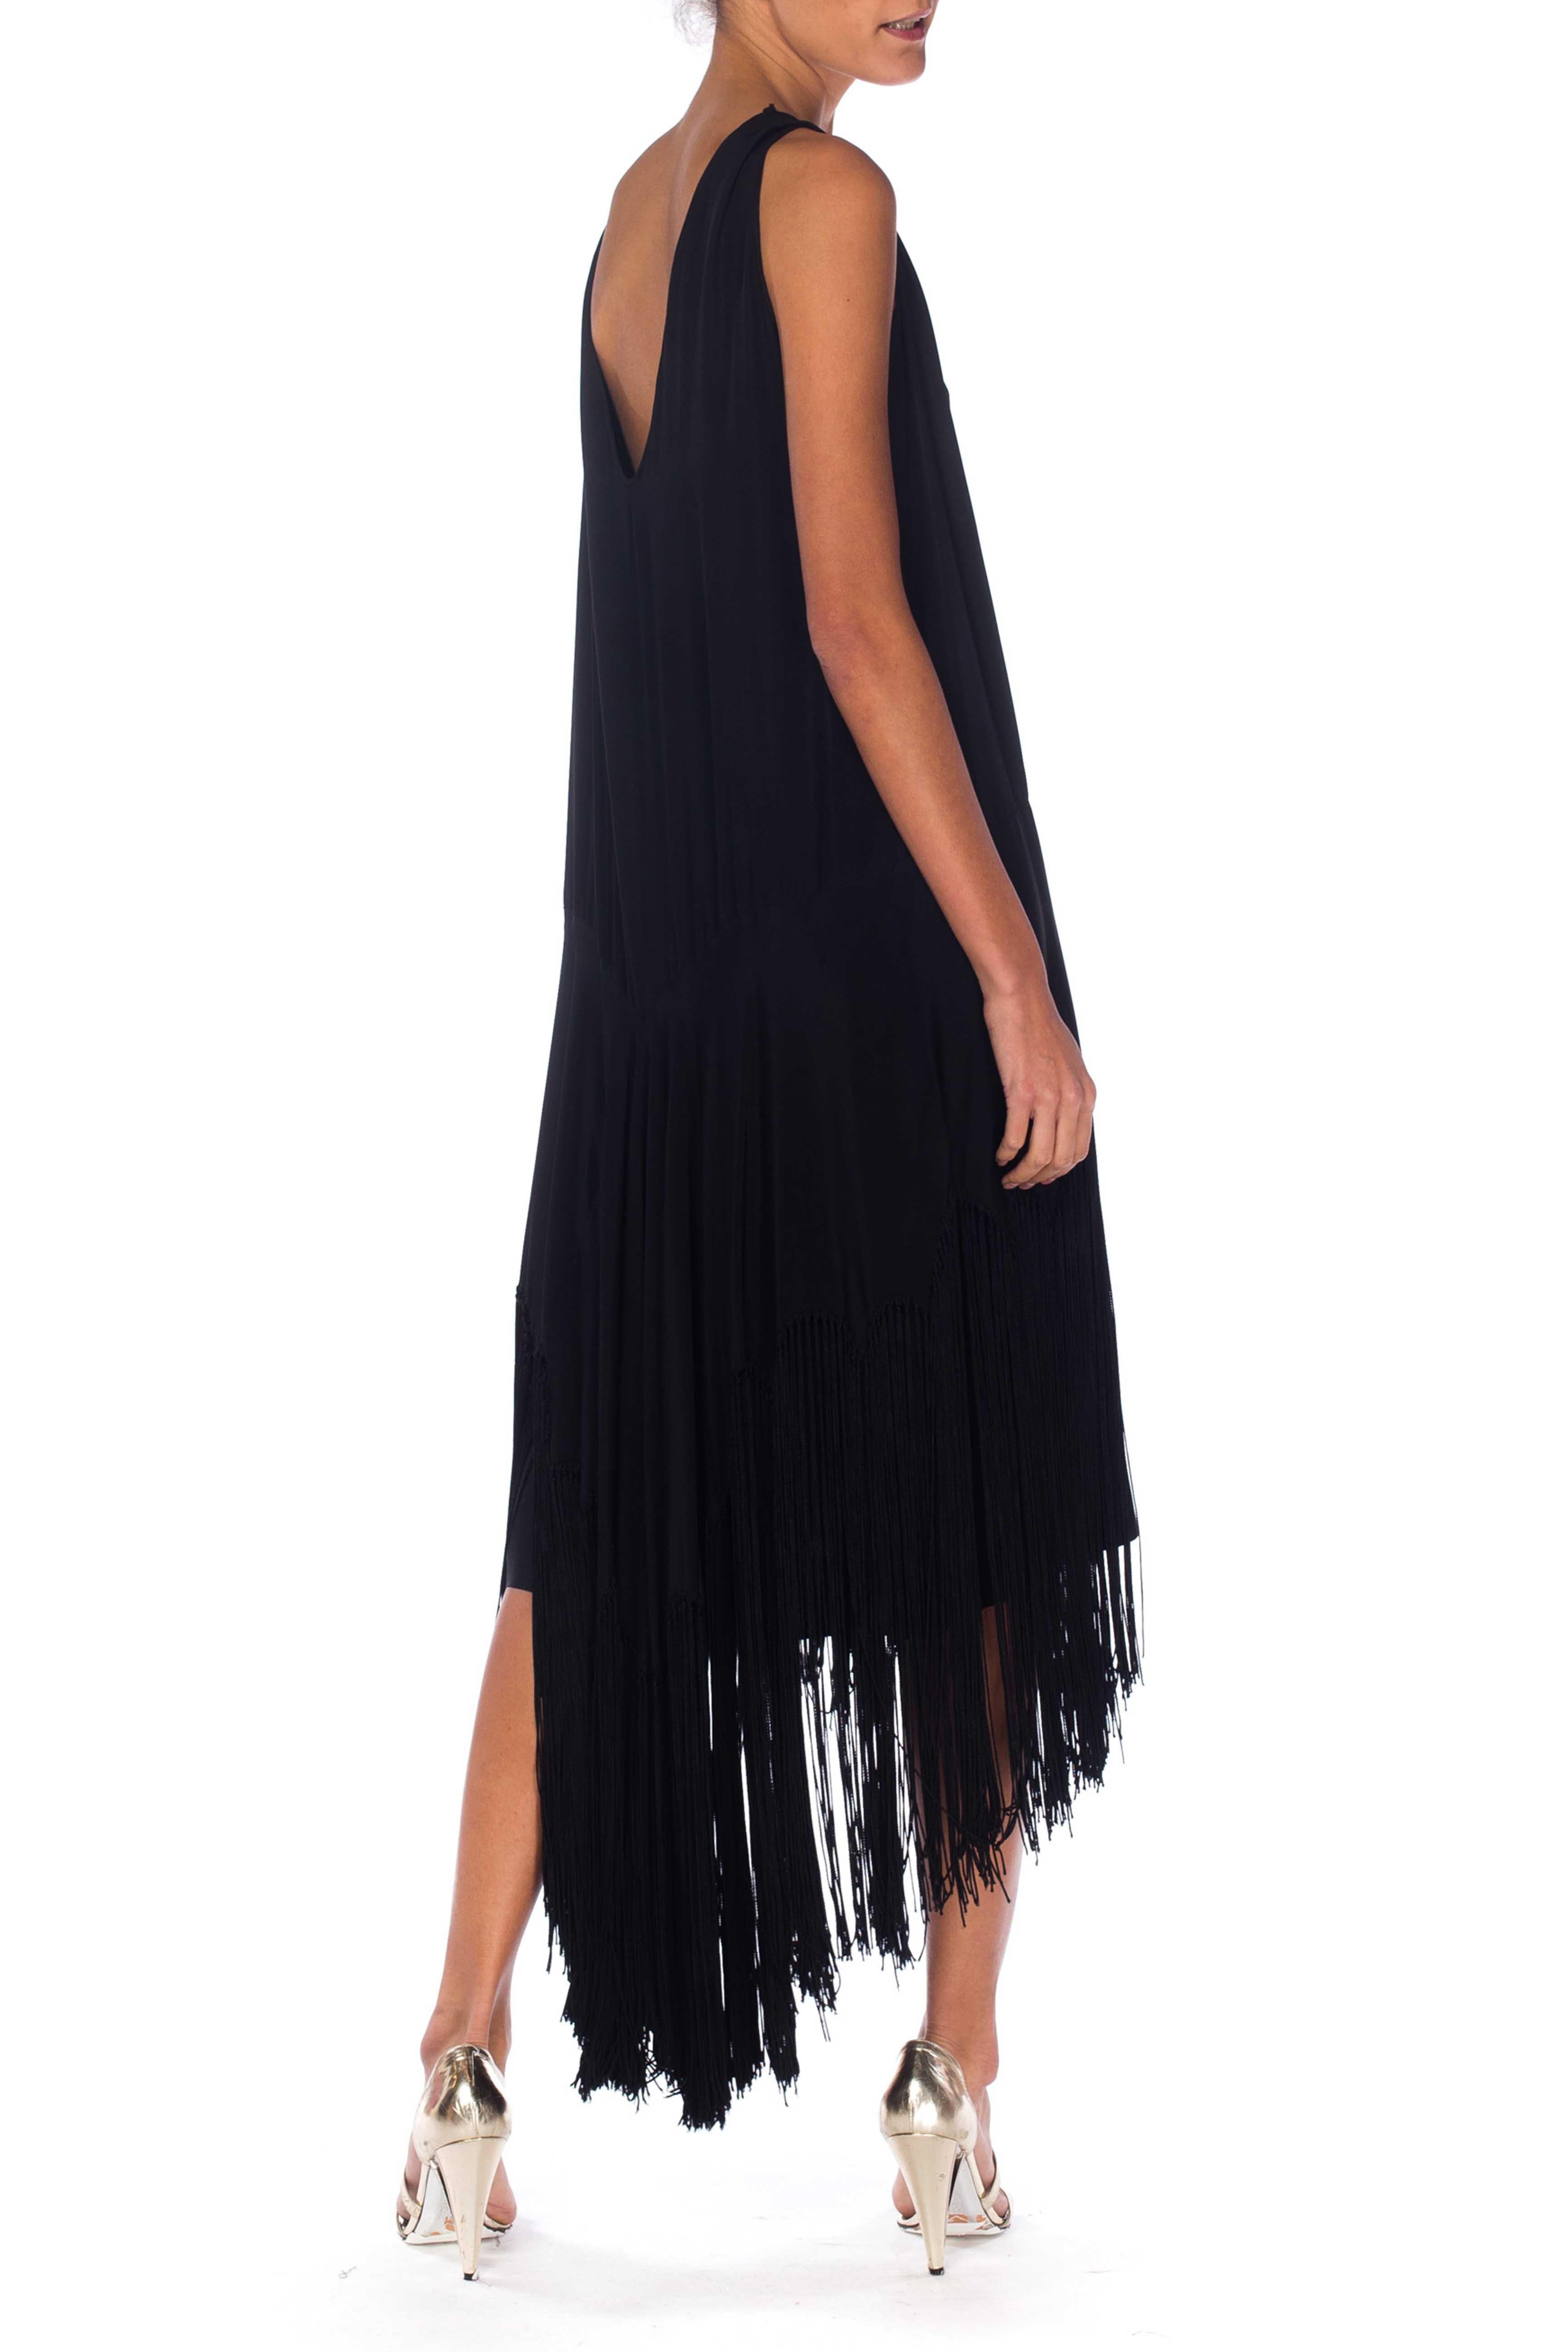 1920S Black Silk Cocktail Dress With Hand Knotted Fringe Skirt In Excellent Condition For Sale In New York, NY